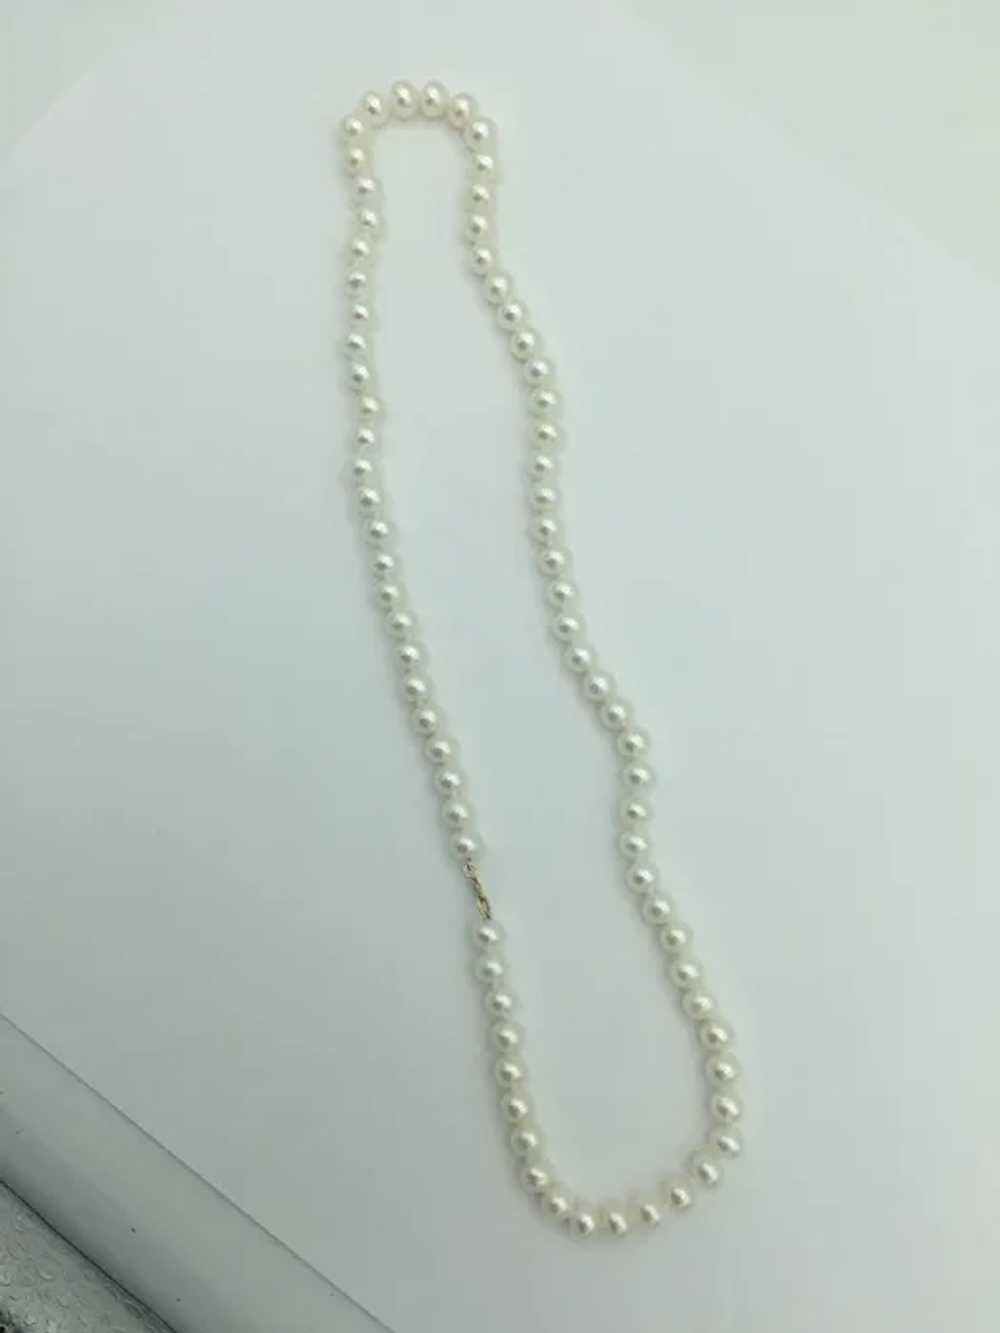 14KY 6mm White Pearl Necklace - image 2